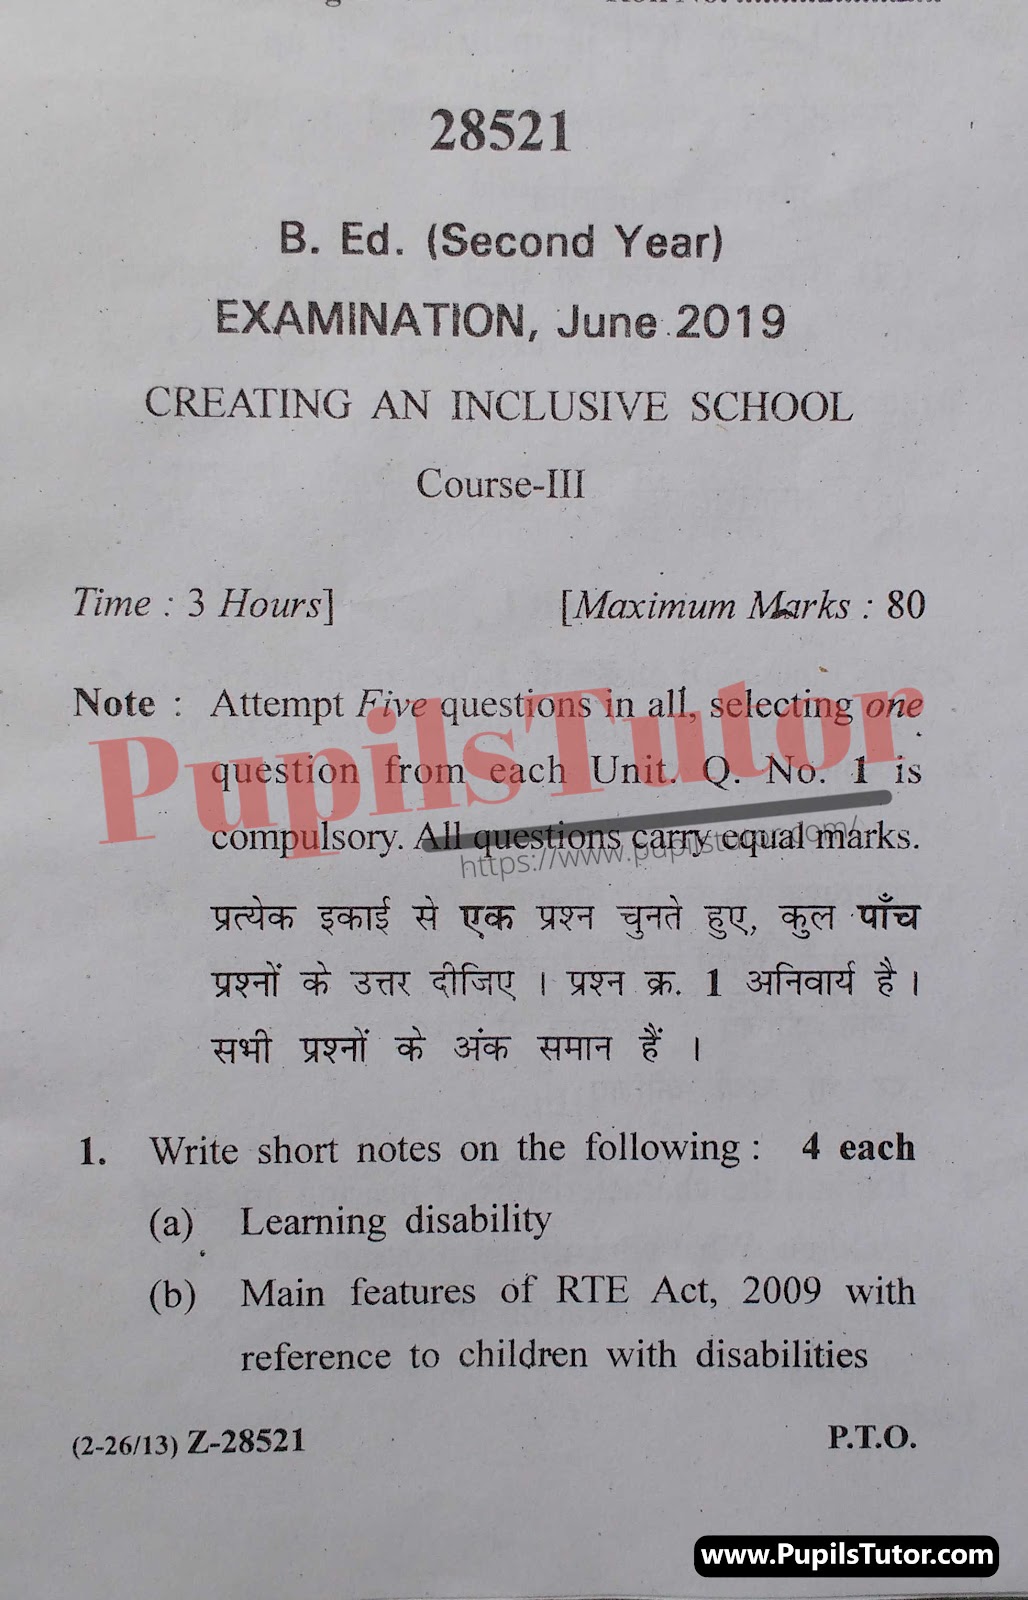 CRSU (Chaudhary Ranbir Singh University, Jind Haryana) BEd Regular Exam Second Year Previous Year Creating An Inclusive School Question Paper For June, 2019 Exam (Question Paper Page 1) - pupilstutor.com